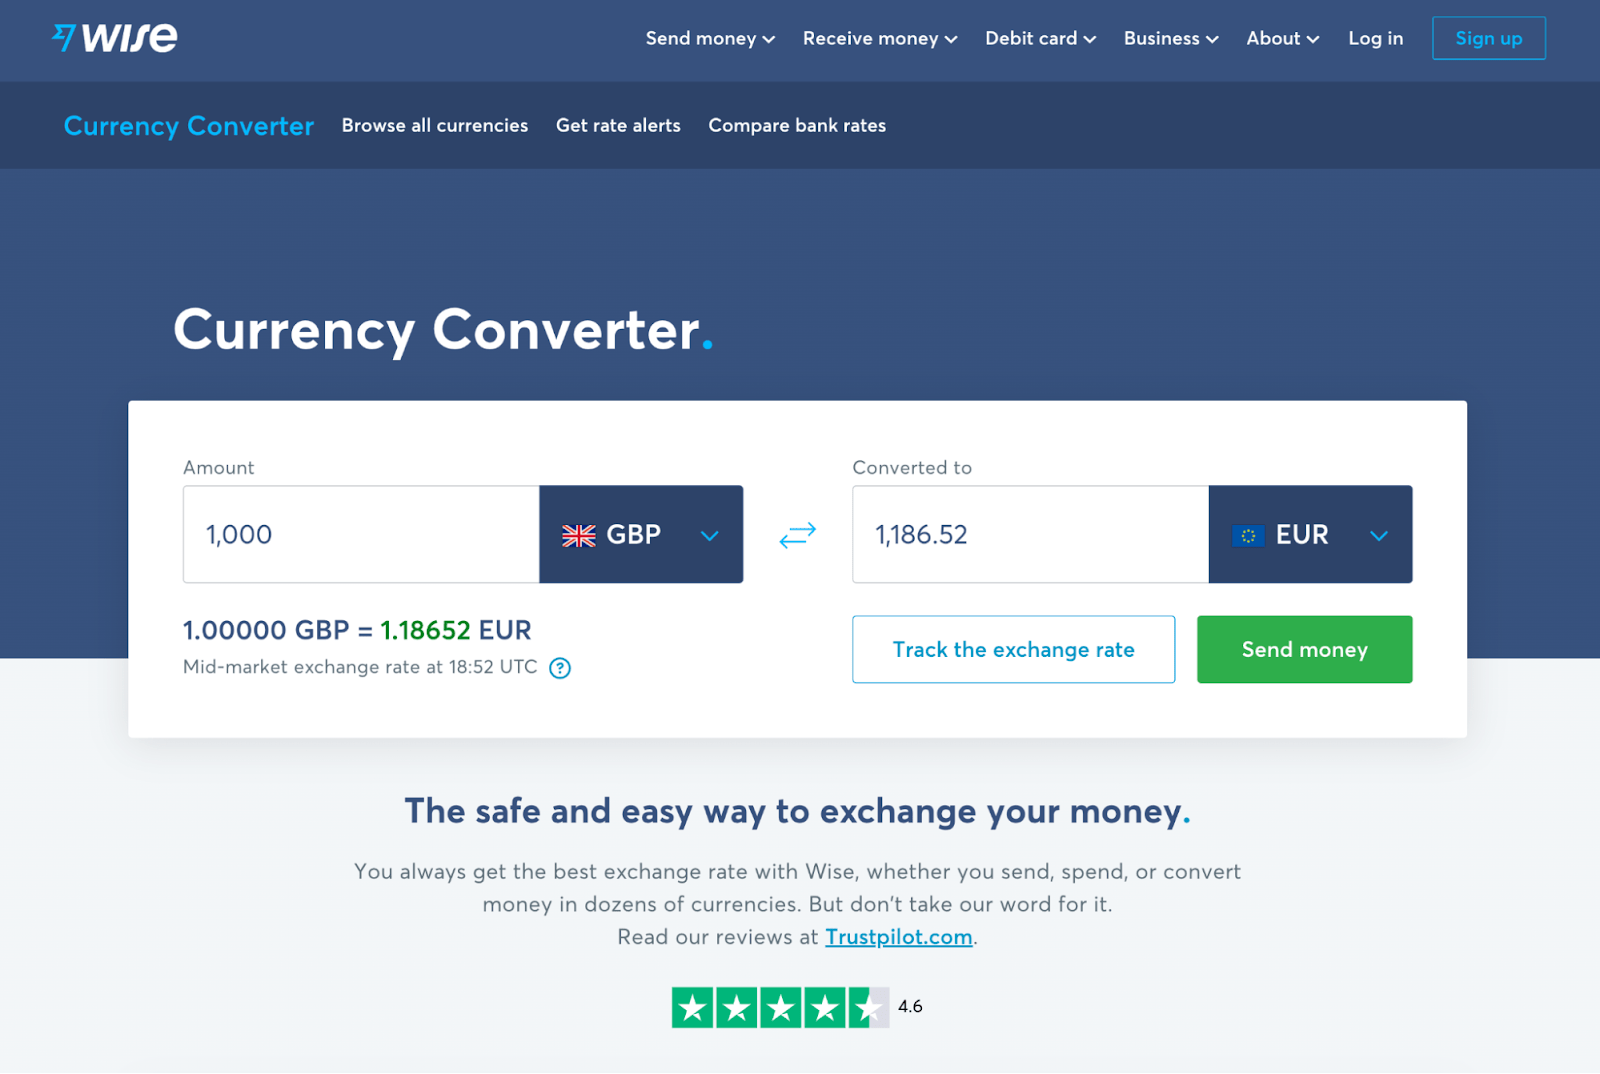 One of Wise's search landing pages showing a currency converter 